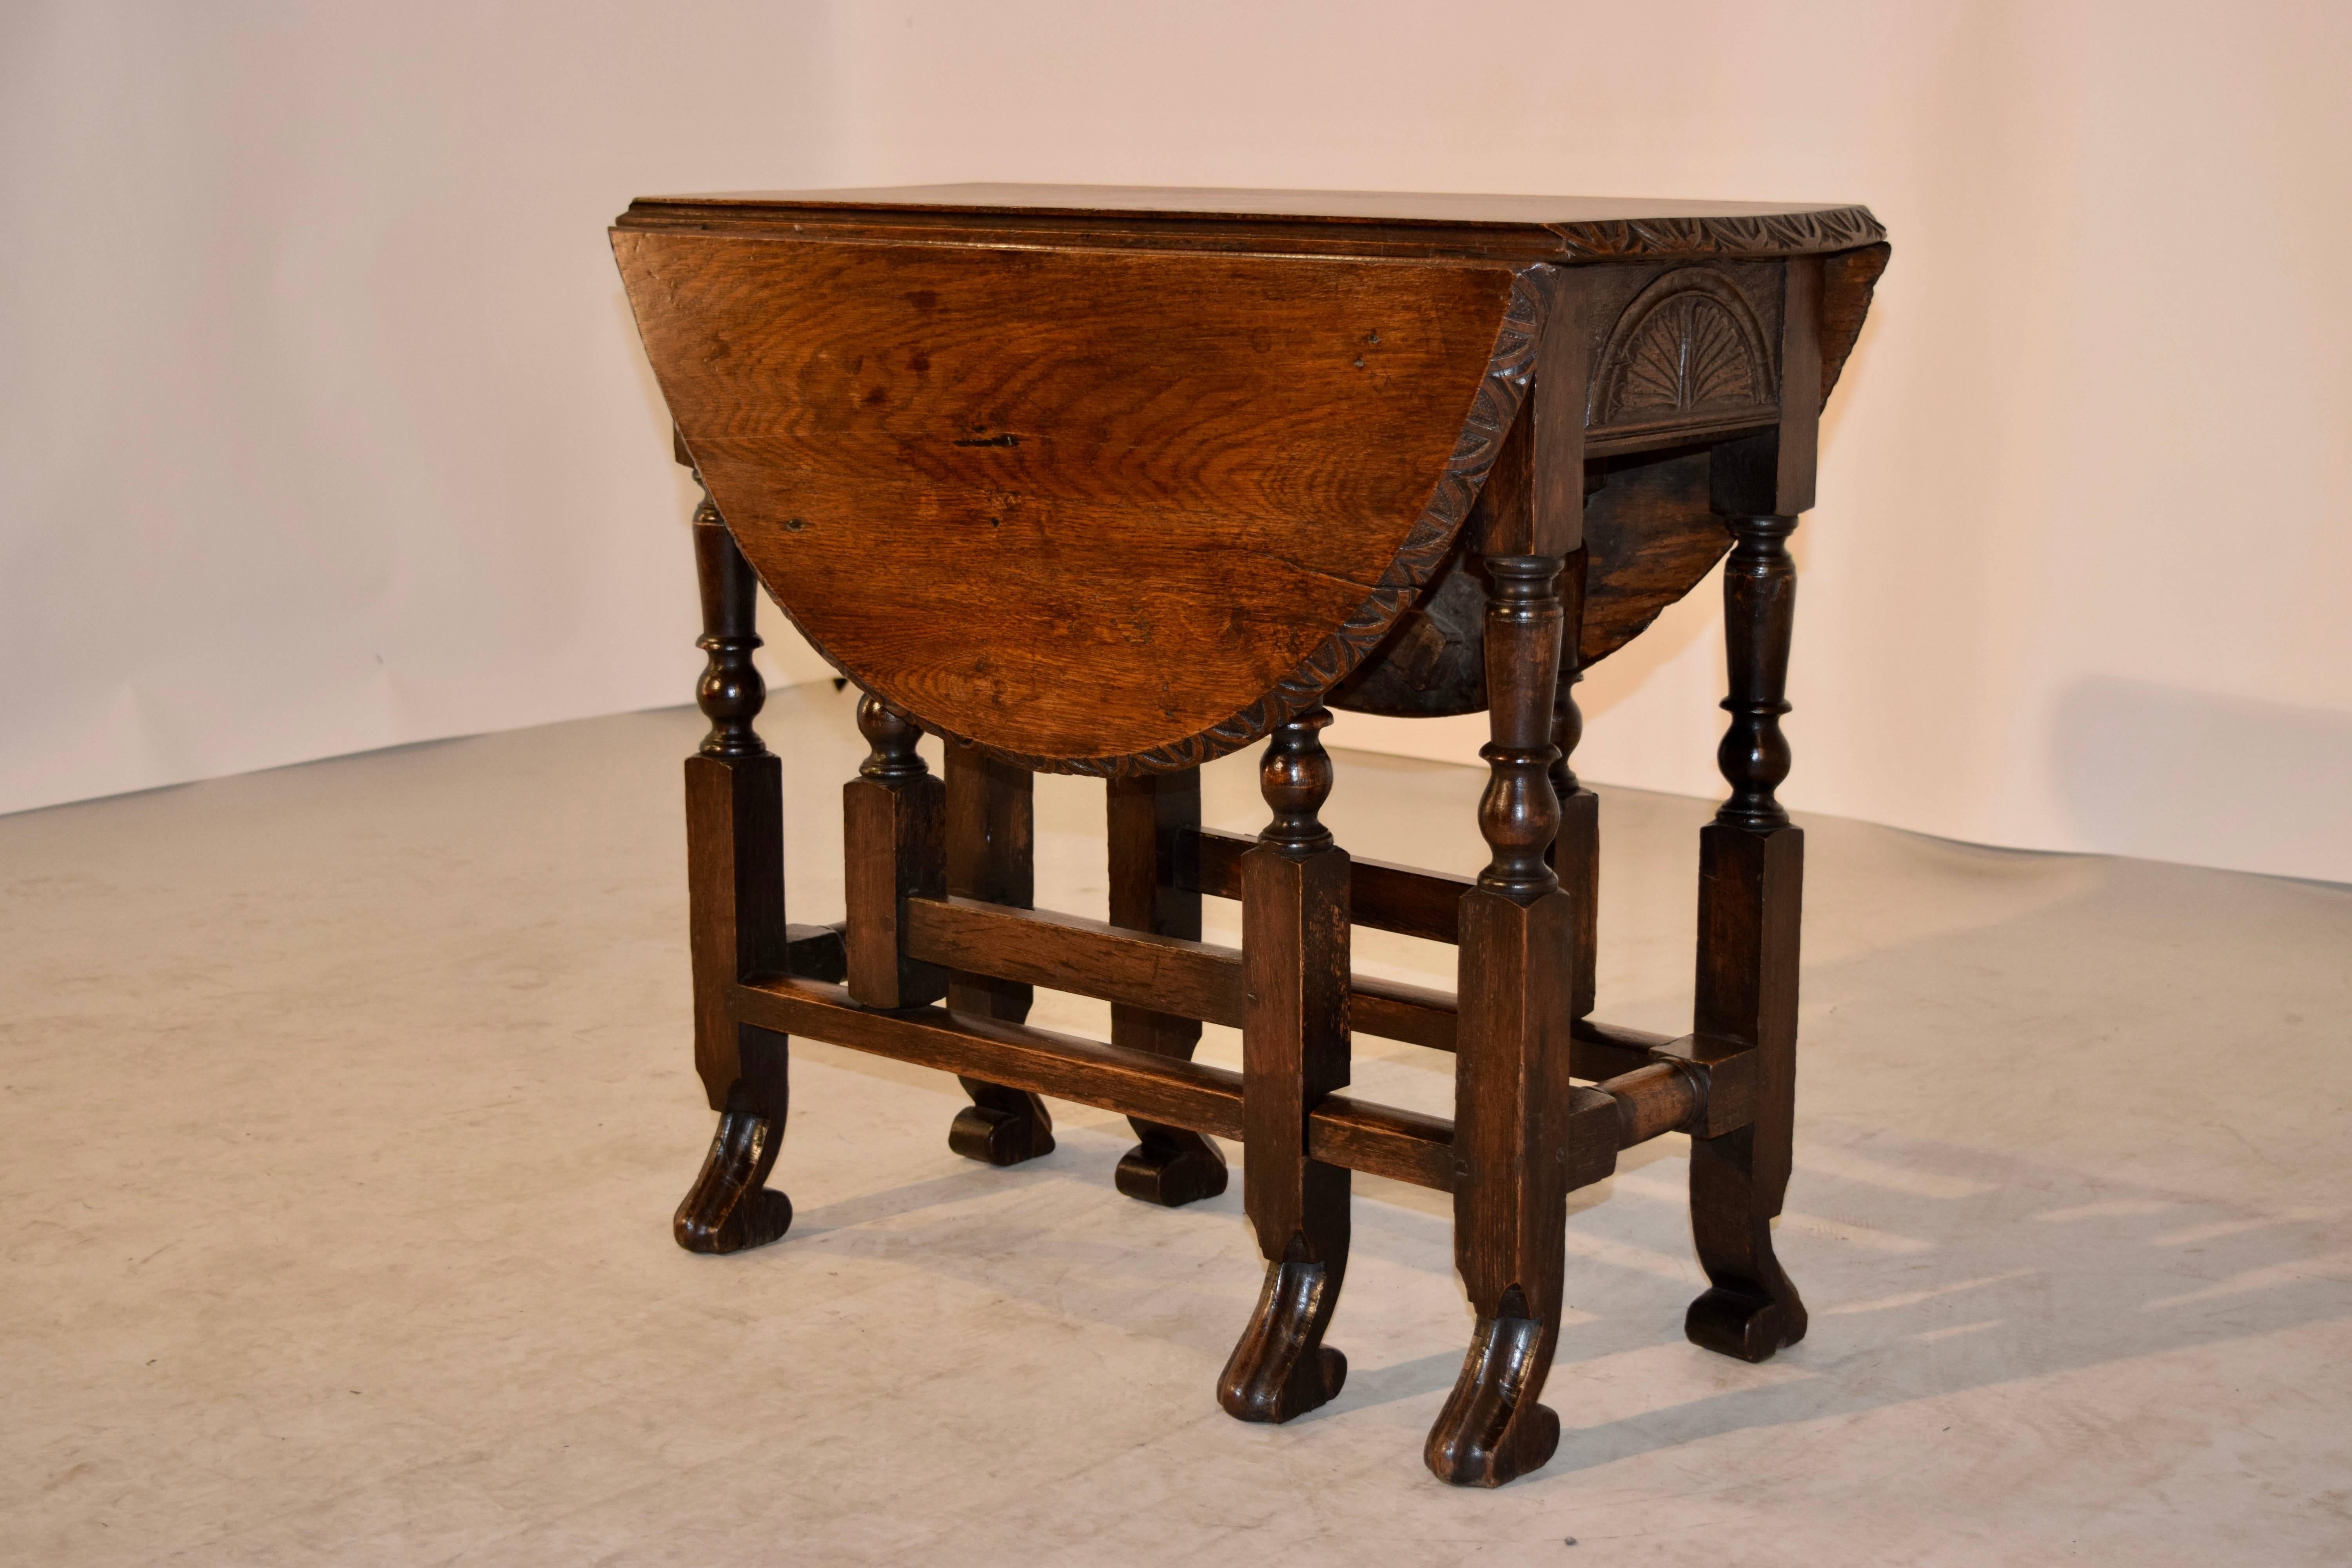 18th century English oak gateleg table with a lovely bevelled and gadrooned edge, following down to a carved apron on both ends of the table and supported on hand-turned legs, which ends in hand-carved scroll feet. The top open measures 30.75 x 36.5.